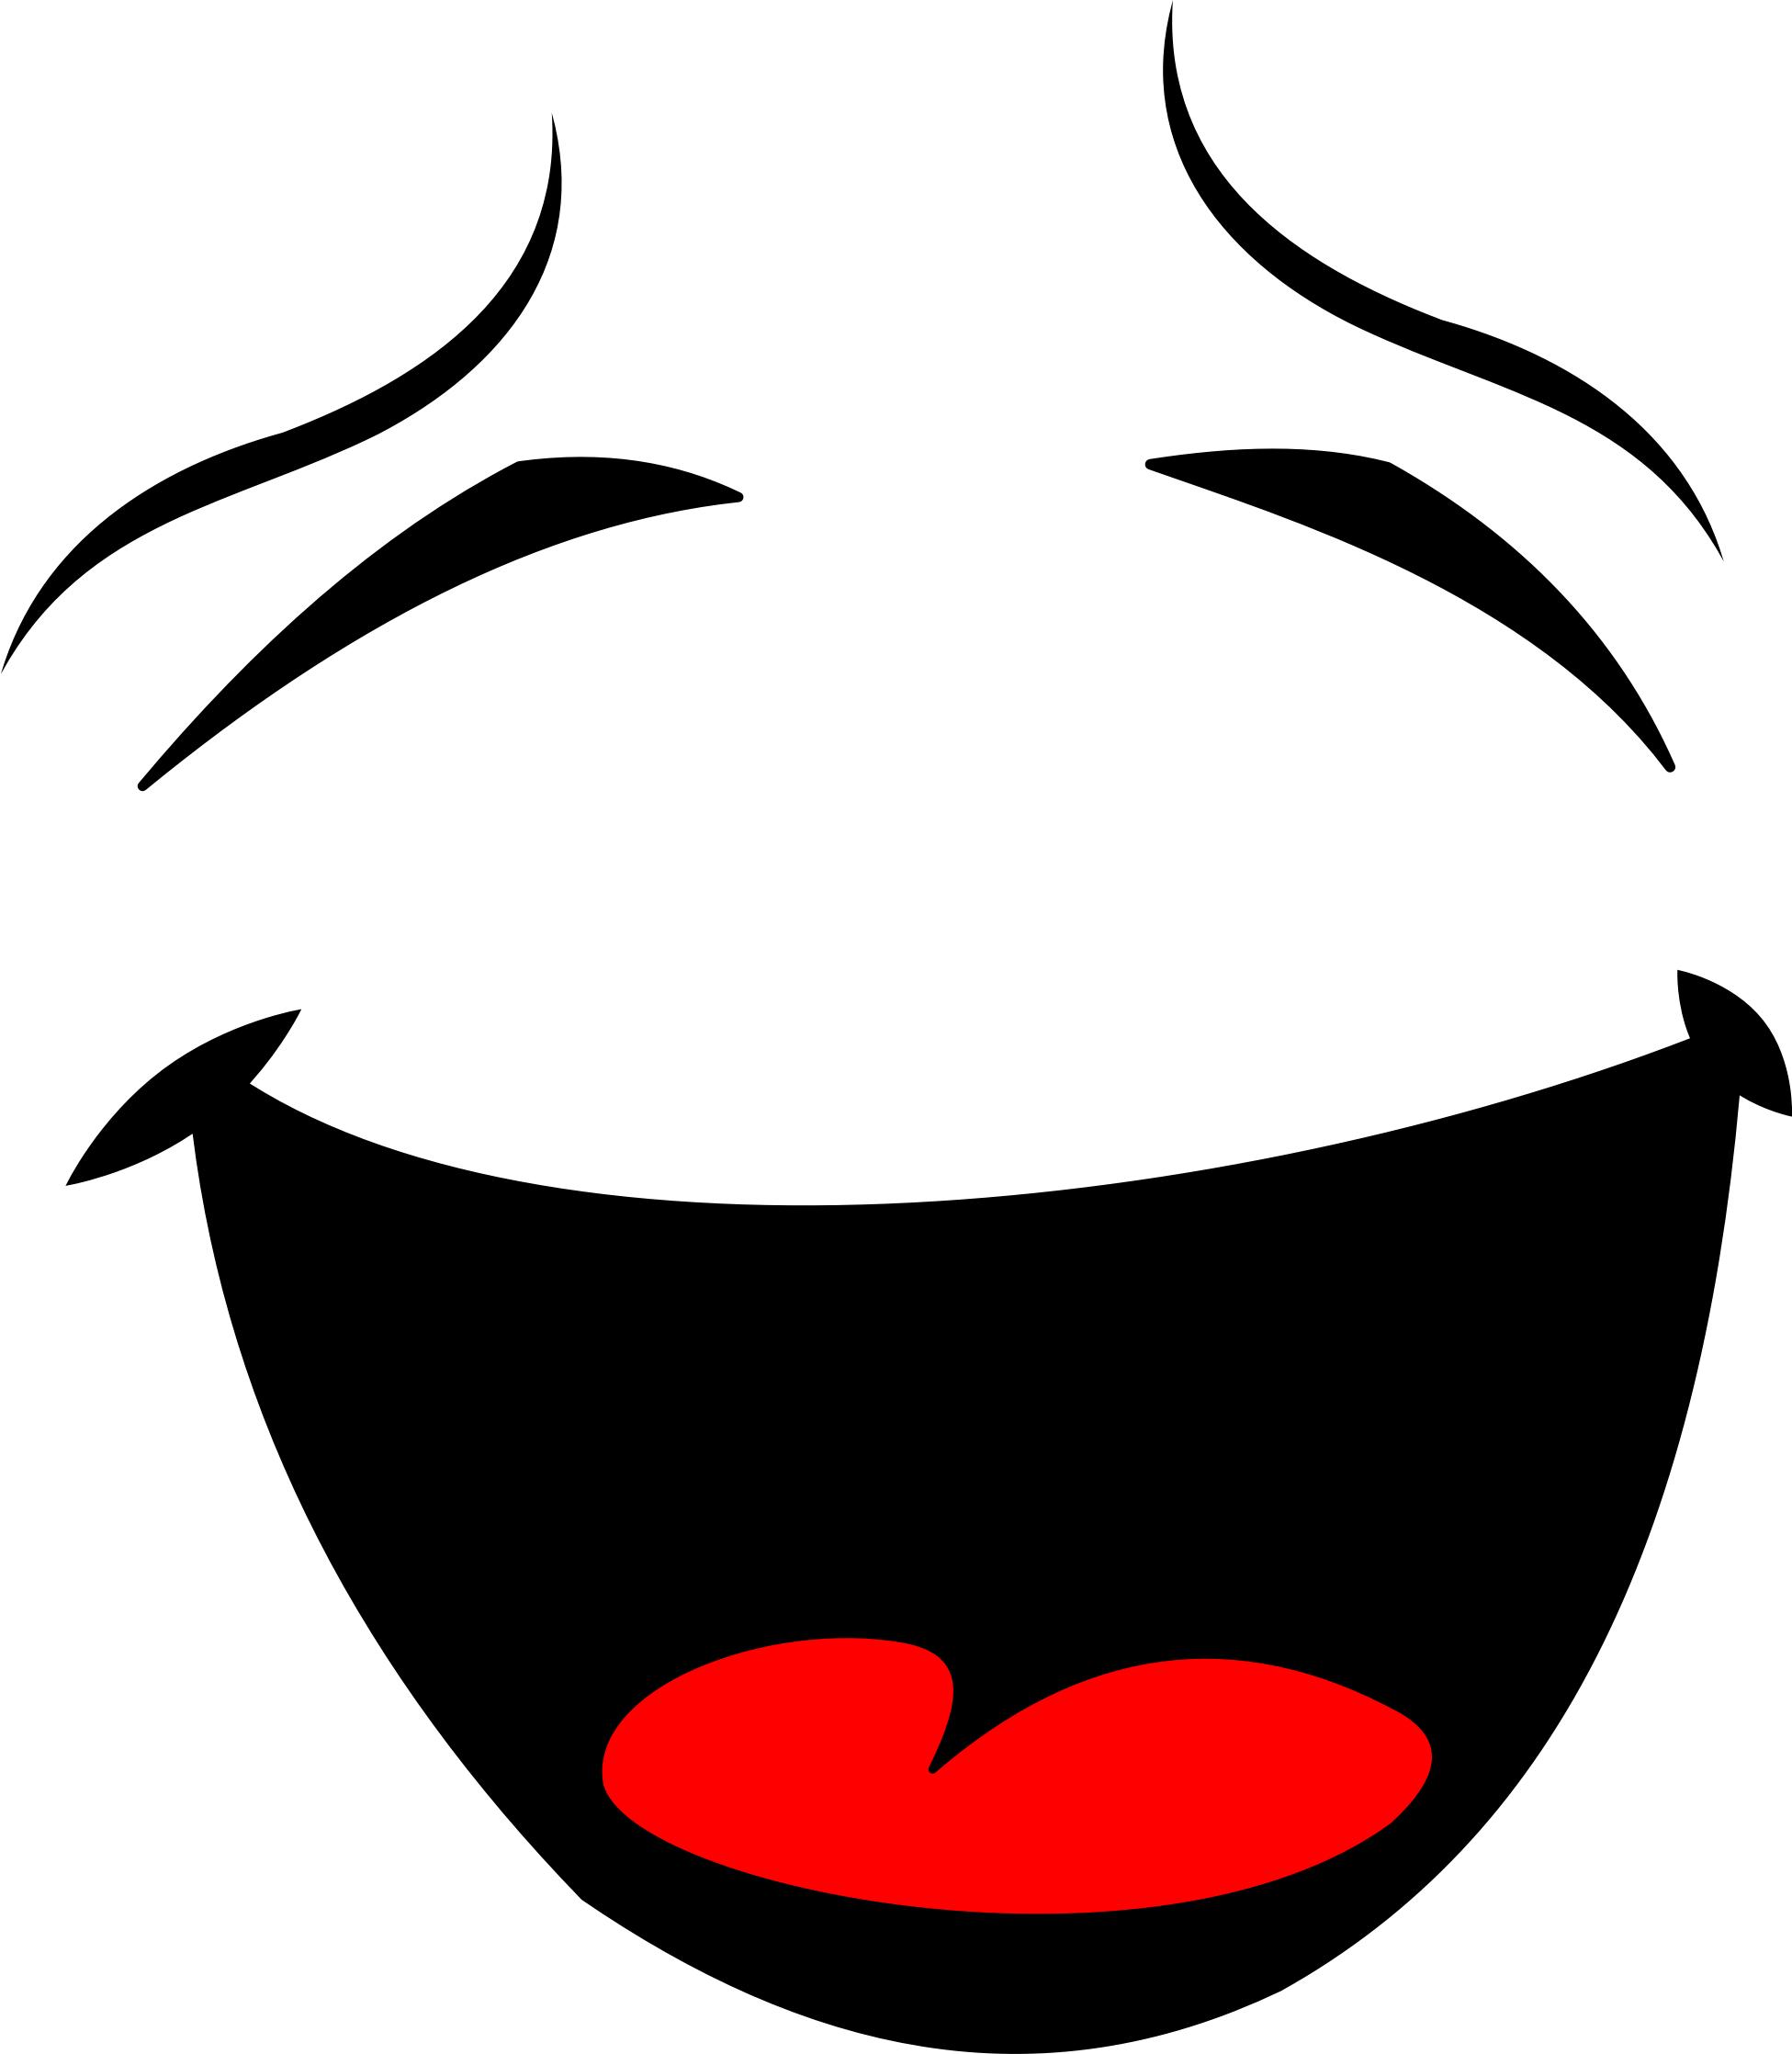 Laughing Smiley Face Silhouette png